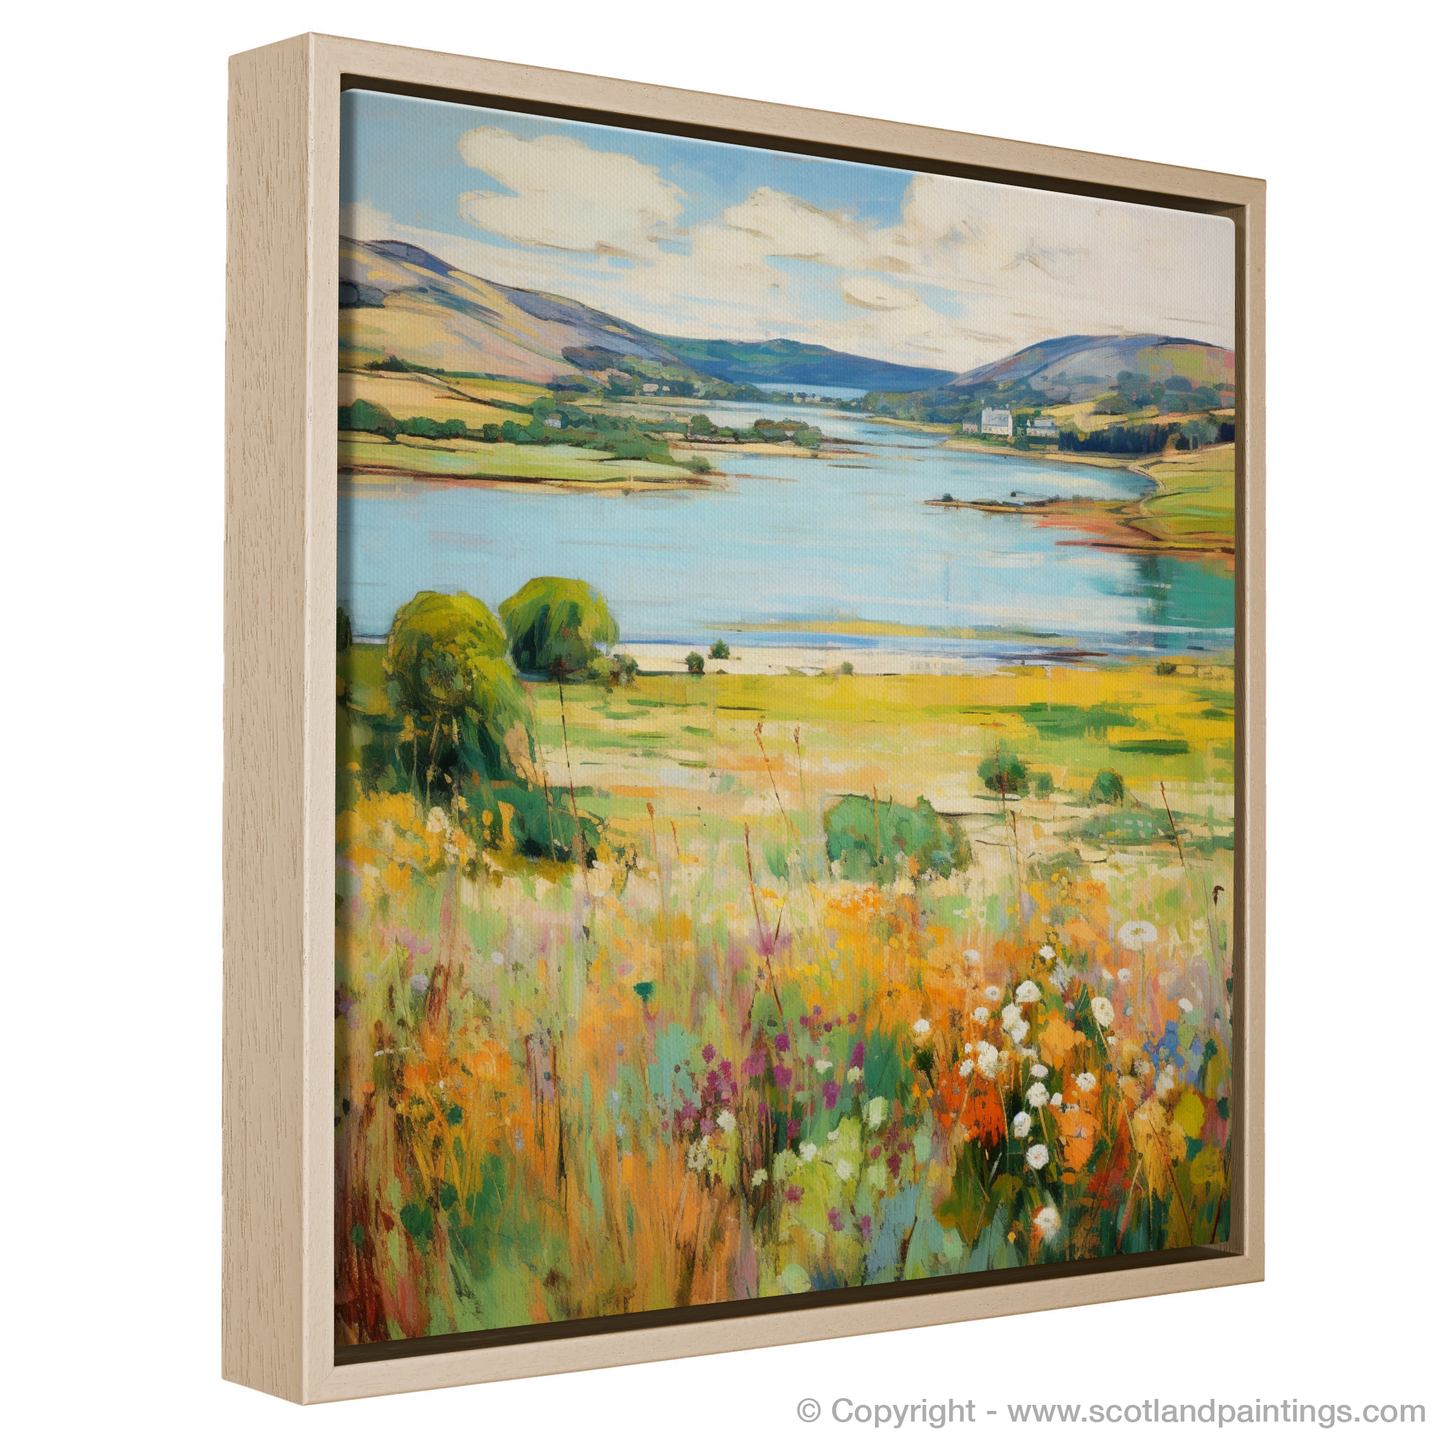 Painting and Art Print of Loch Leven, Perth and Kinross in summer entitled "Summer Serenity at Loch Leven".